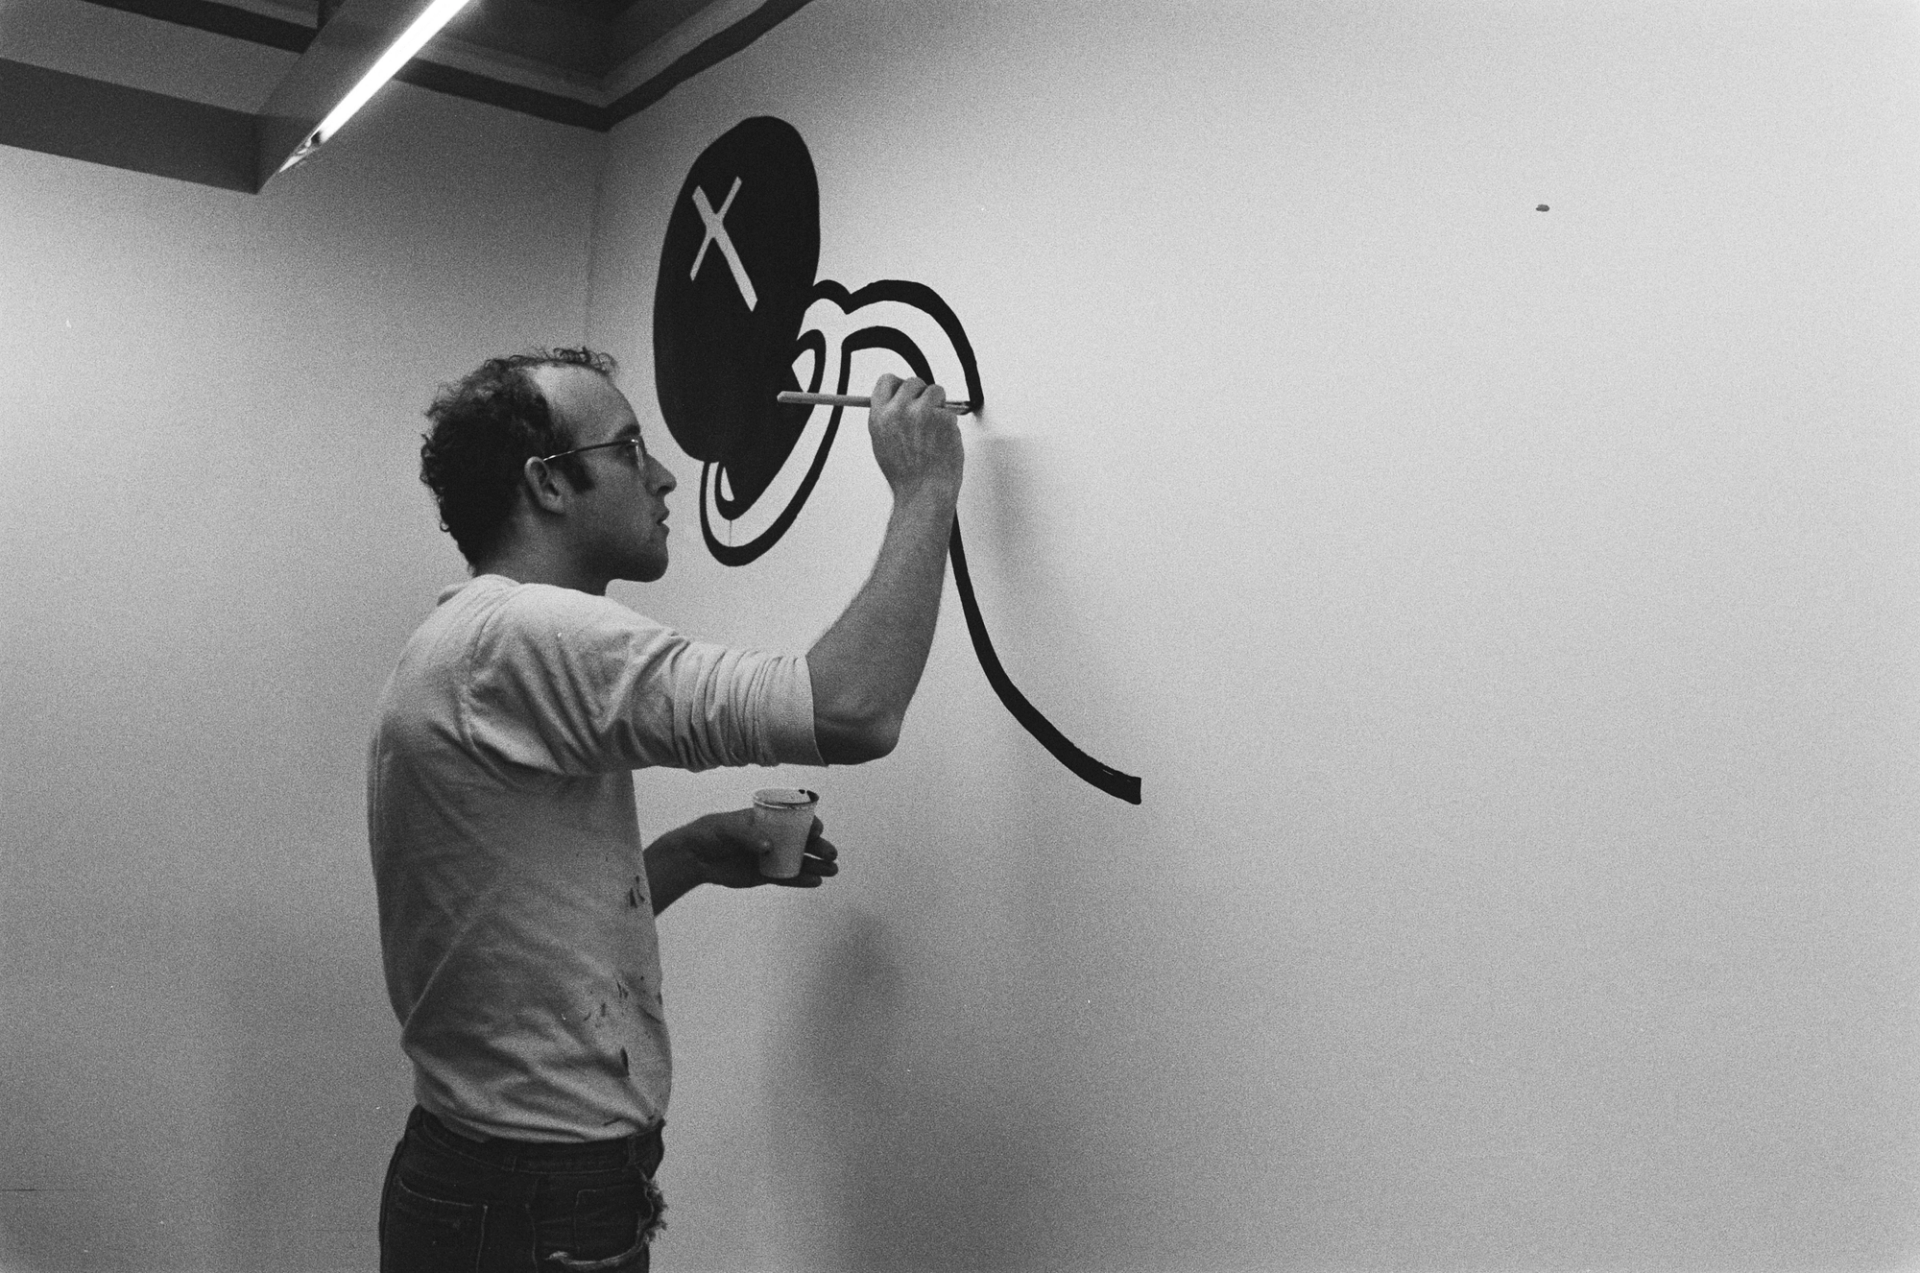 A monochrome image of the artist Keith Haring at work on a mural at the Stedelijk Museum in Amsterdam. He is wearing a long-sleeved t-shirt and his signature glasses.